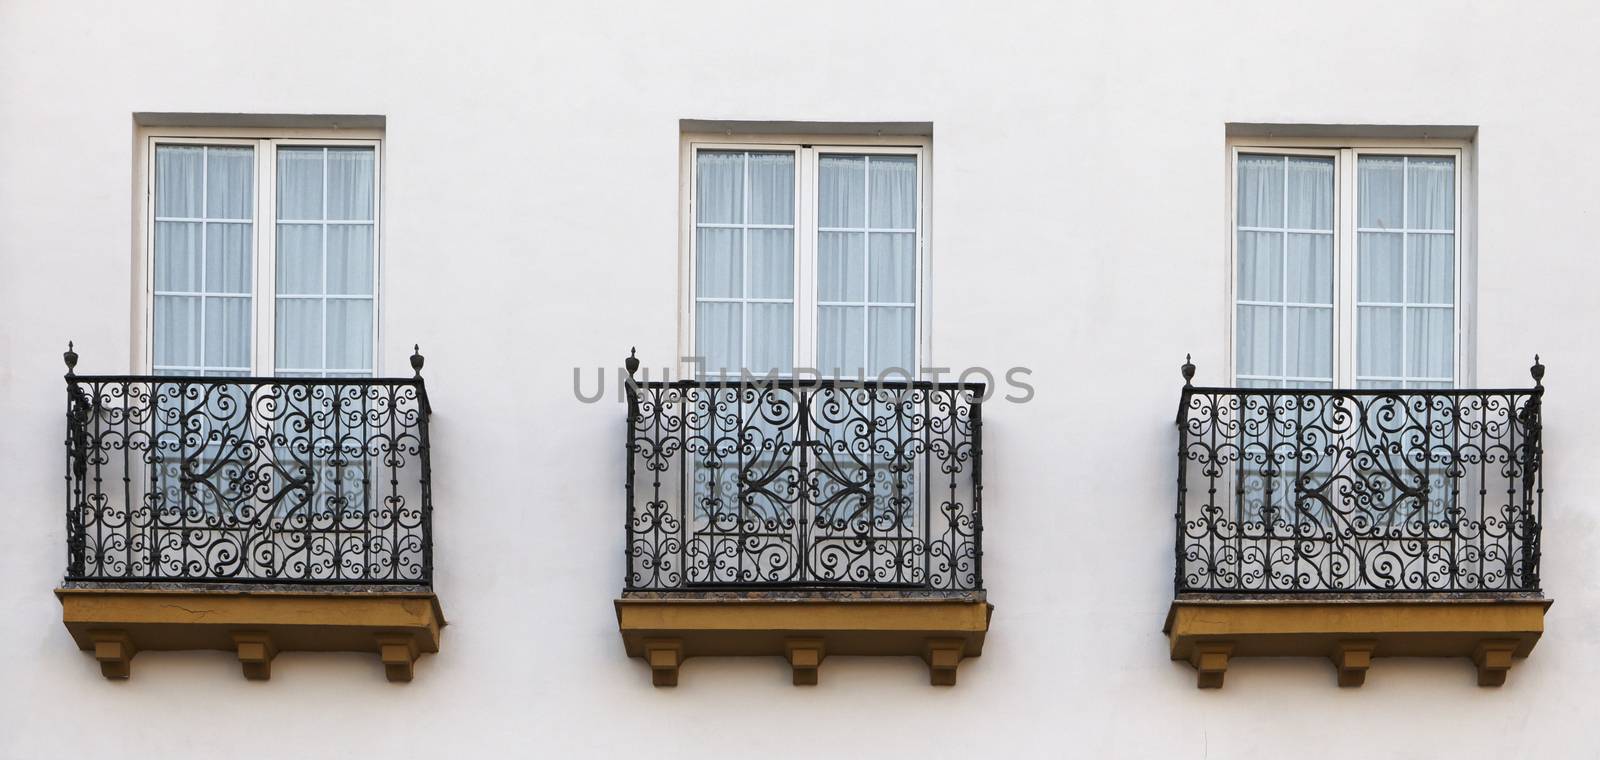 Decorative balconies of a house in Seville, Spain